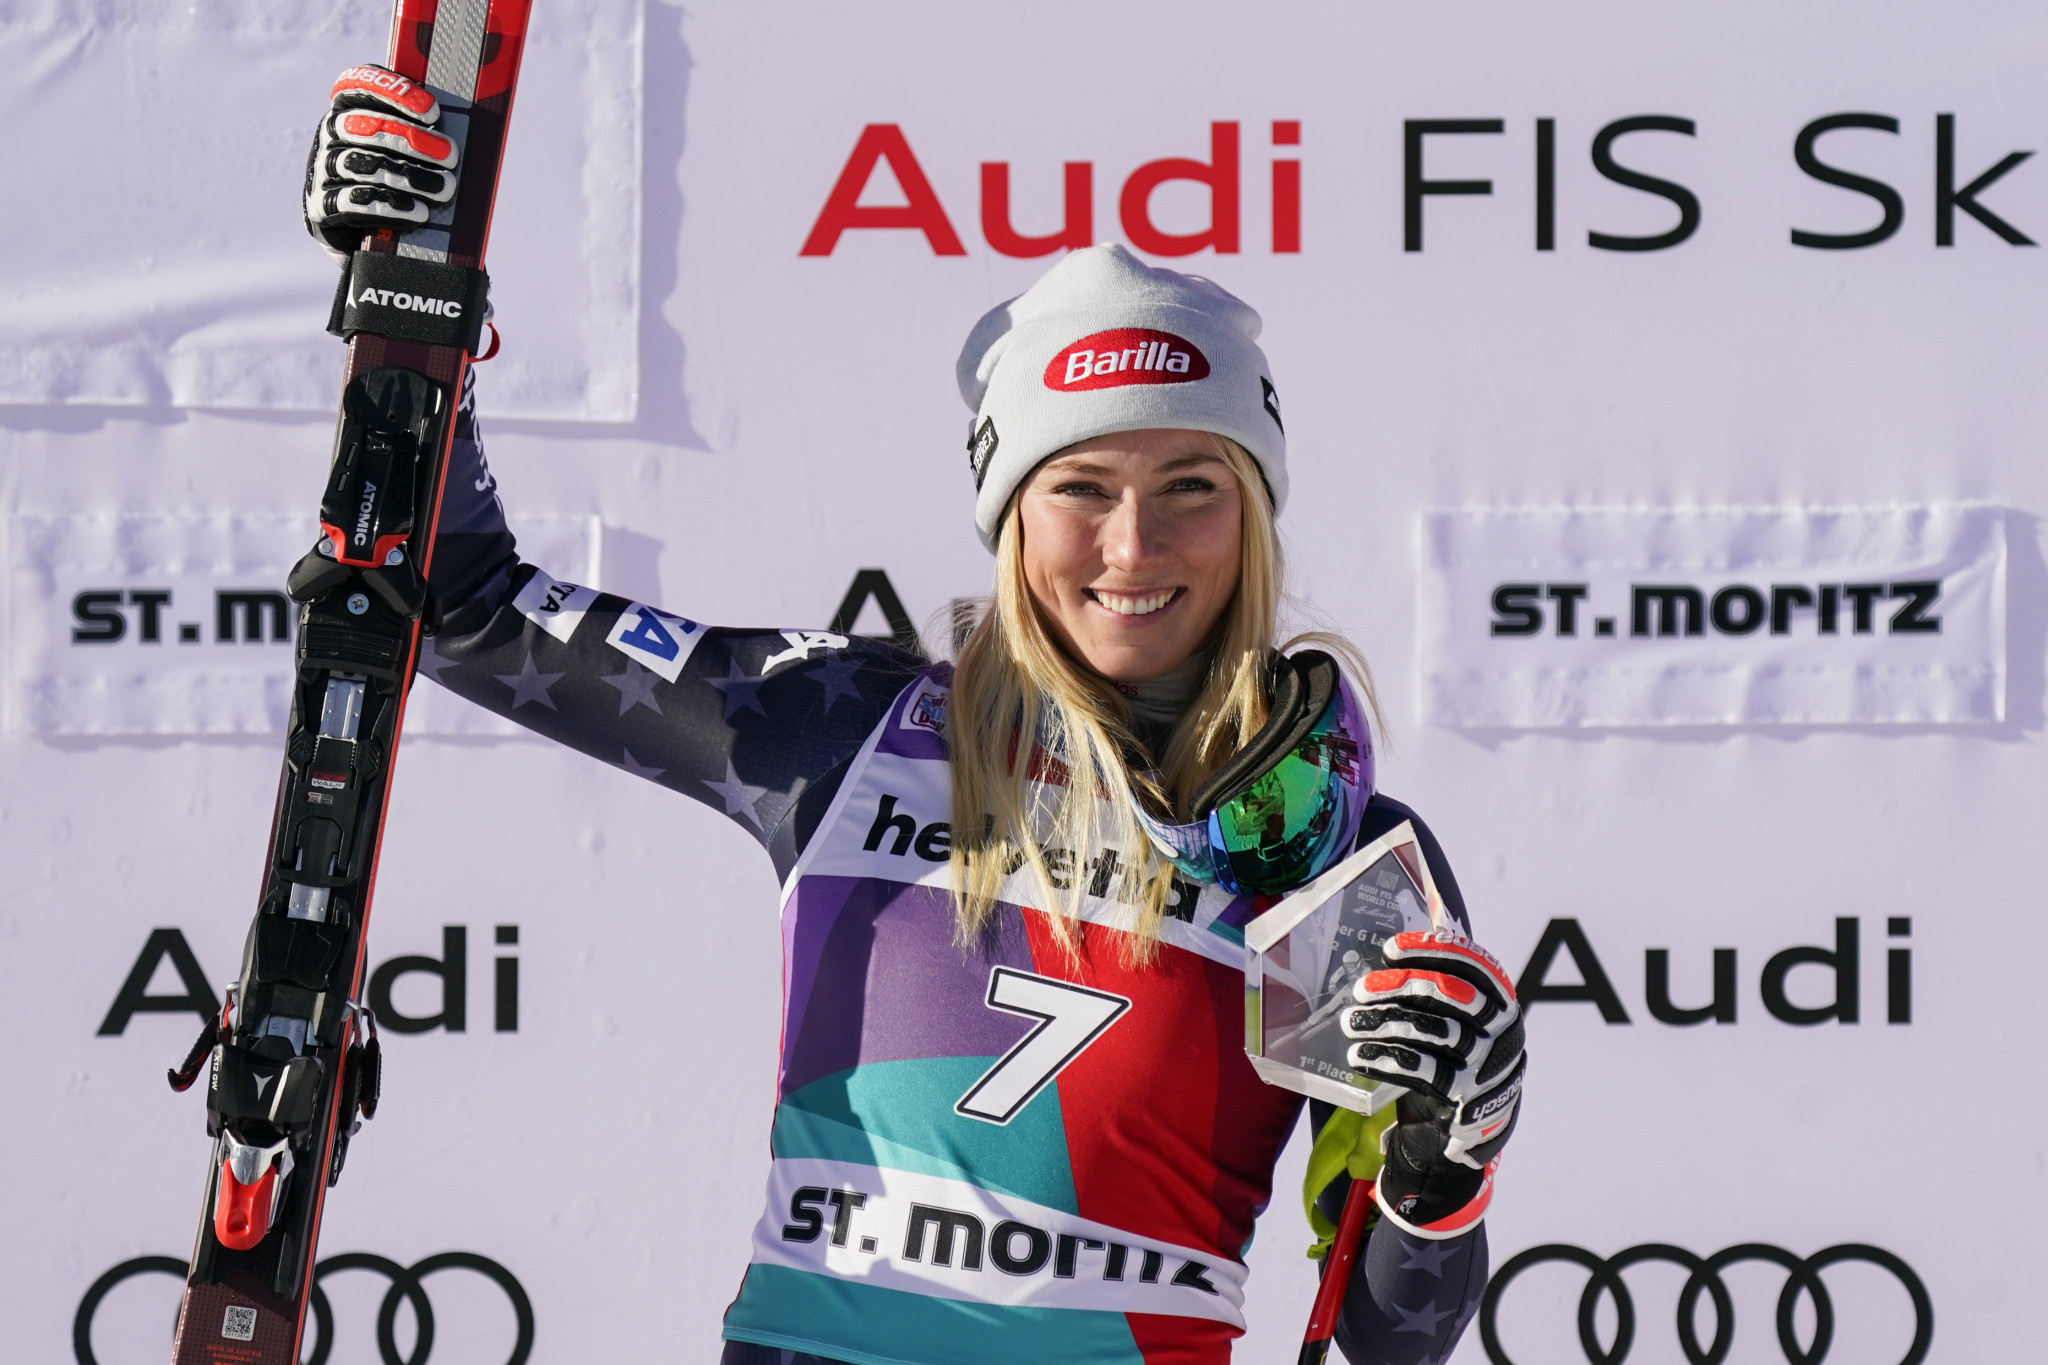 Mikaela Shiffrin won her 77th Alpine Ski World Cup gold today in St Moritz ©Getty Images